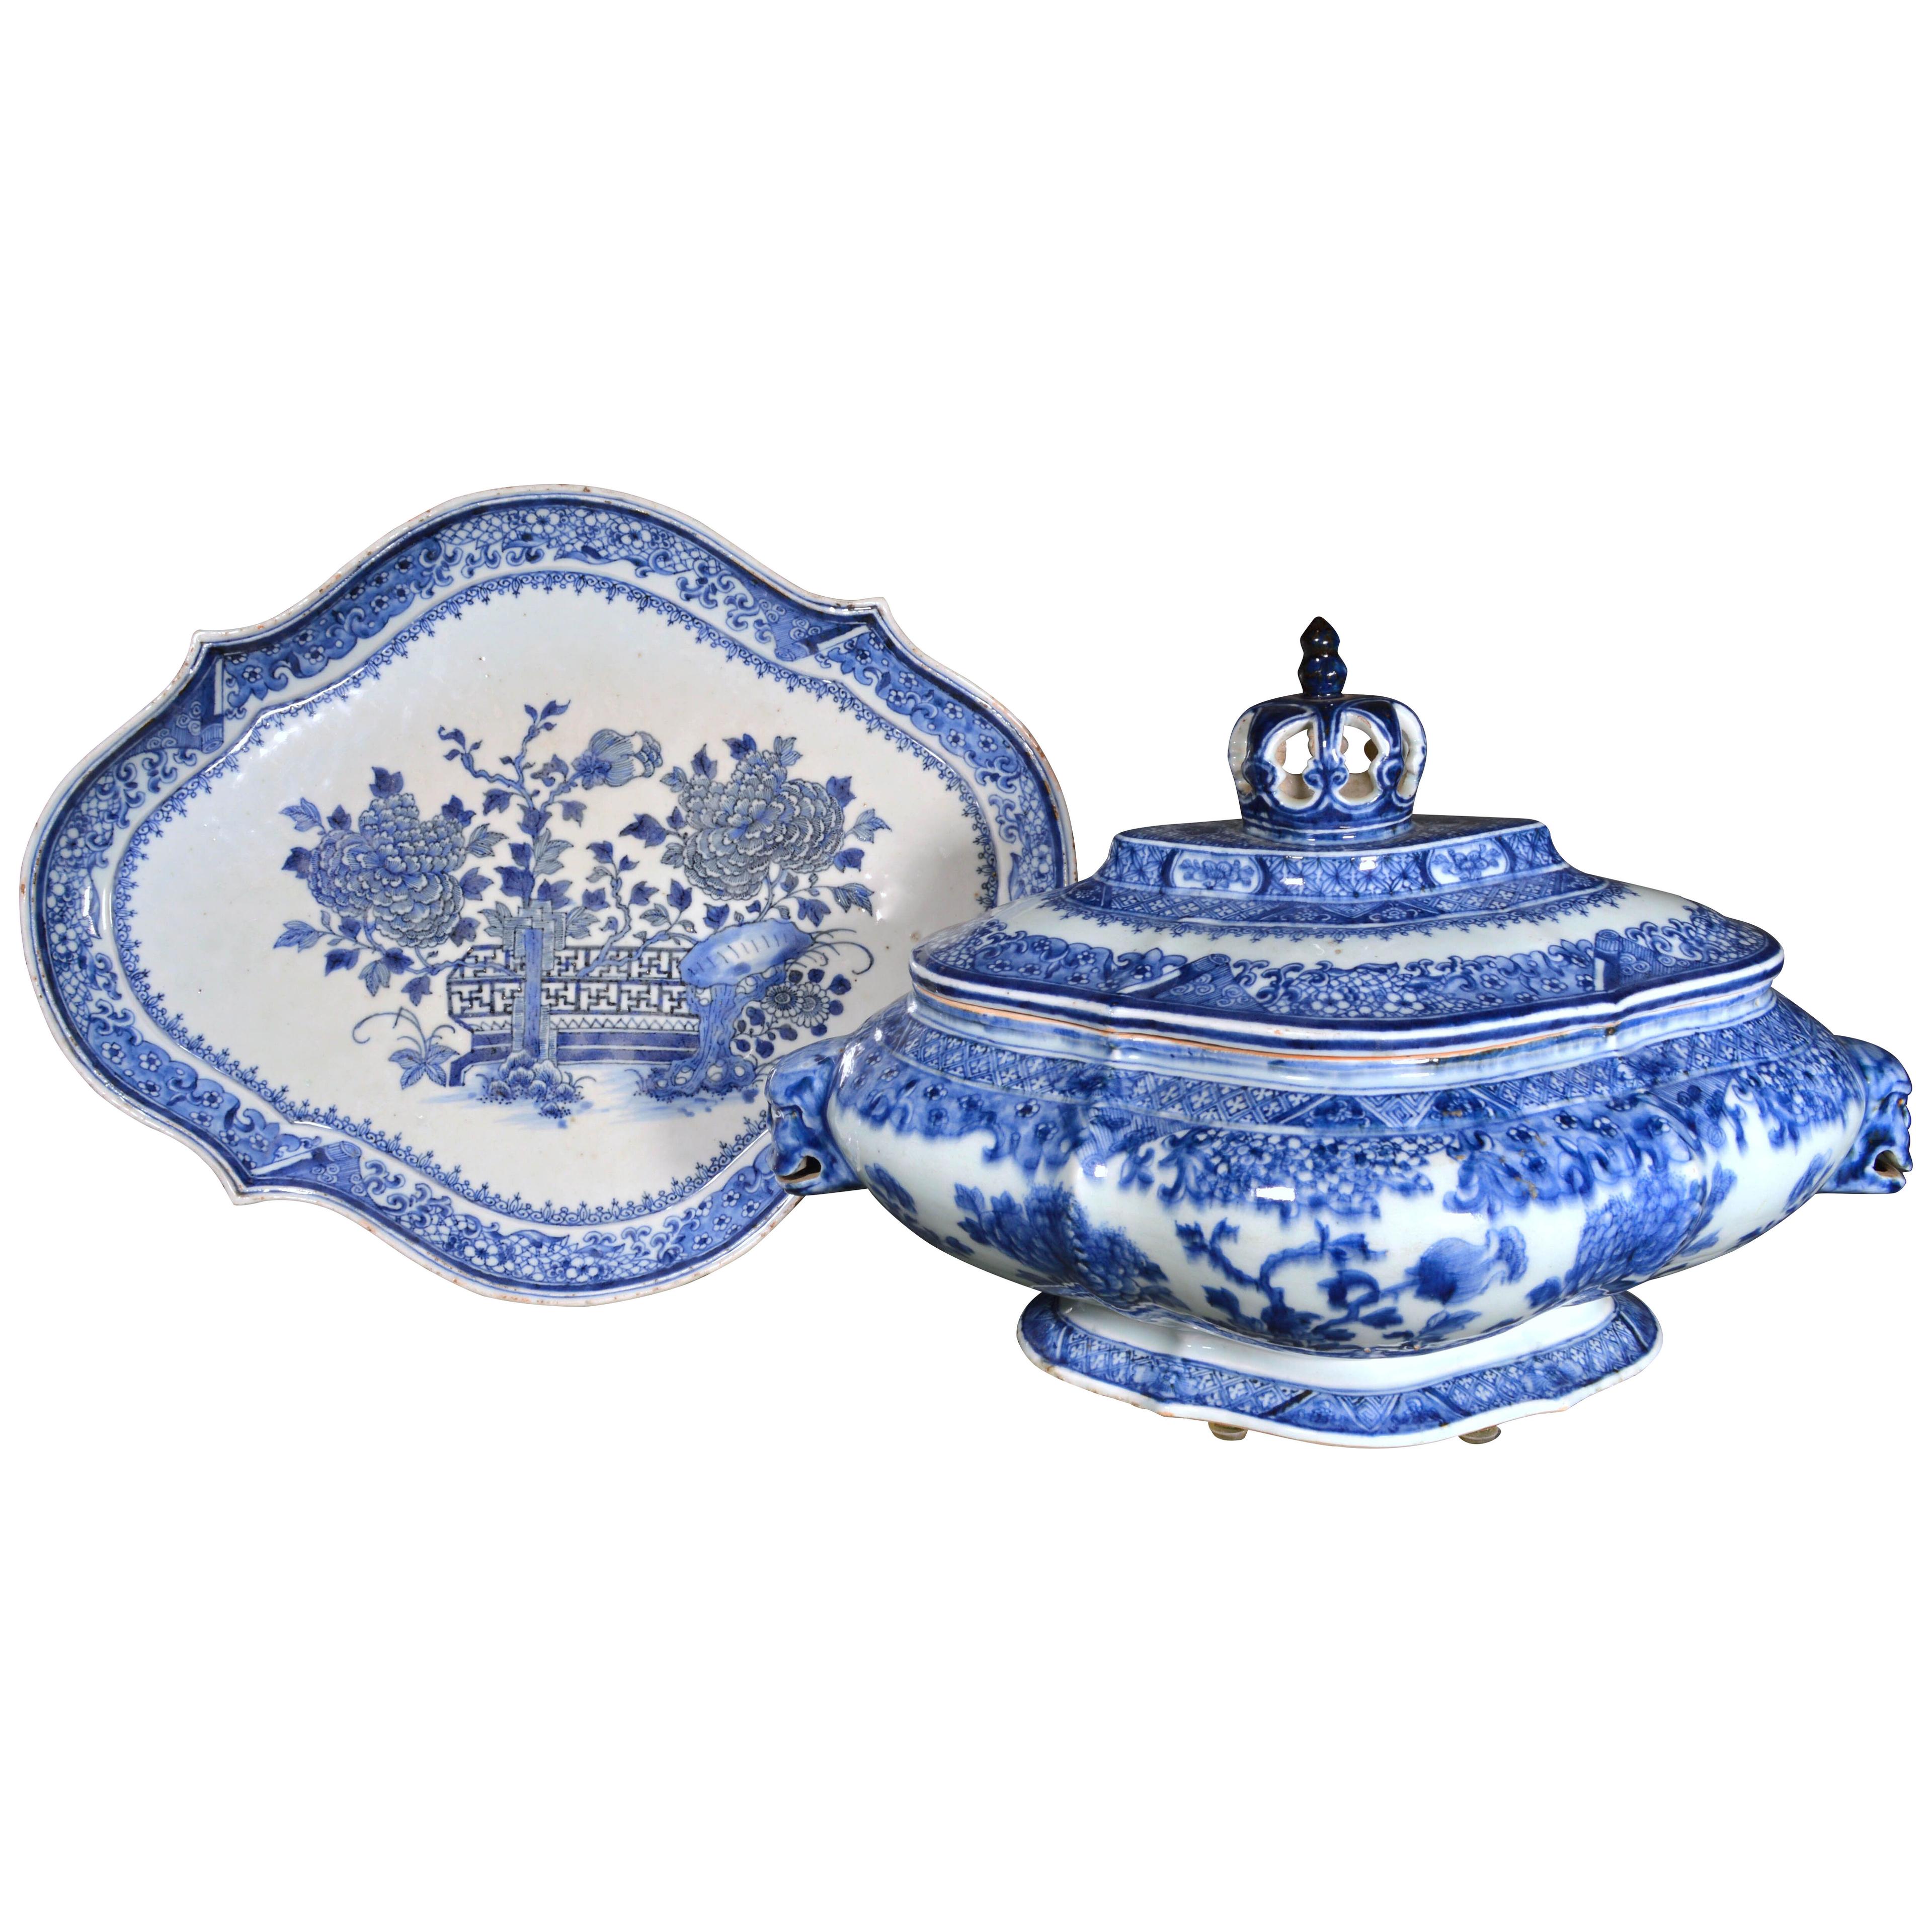 Chinese Export Porcelain Early Blue & White Soup Tureen, Cover & Stand